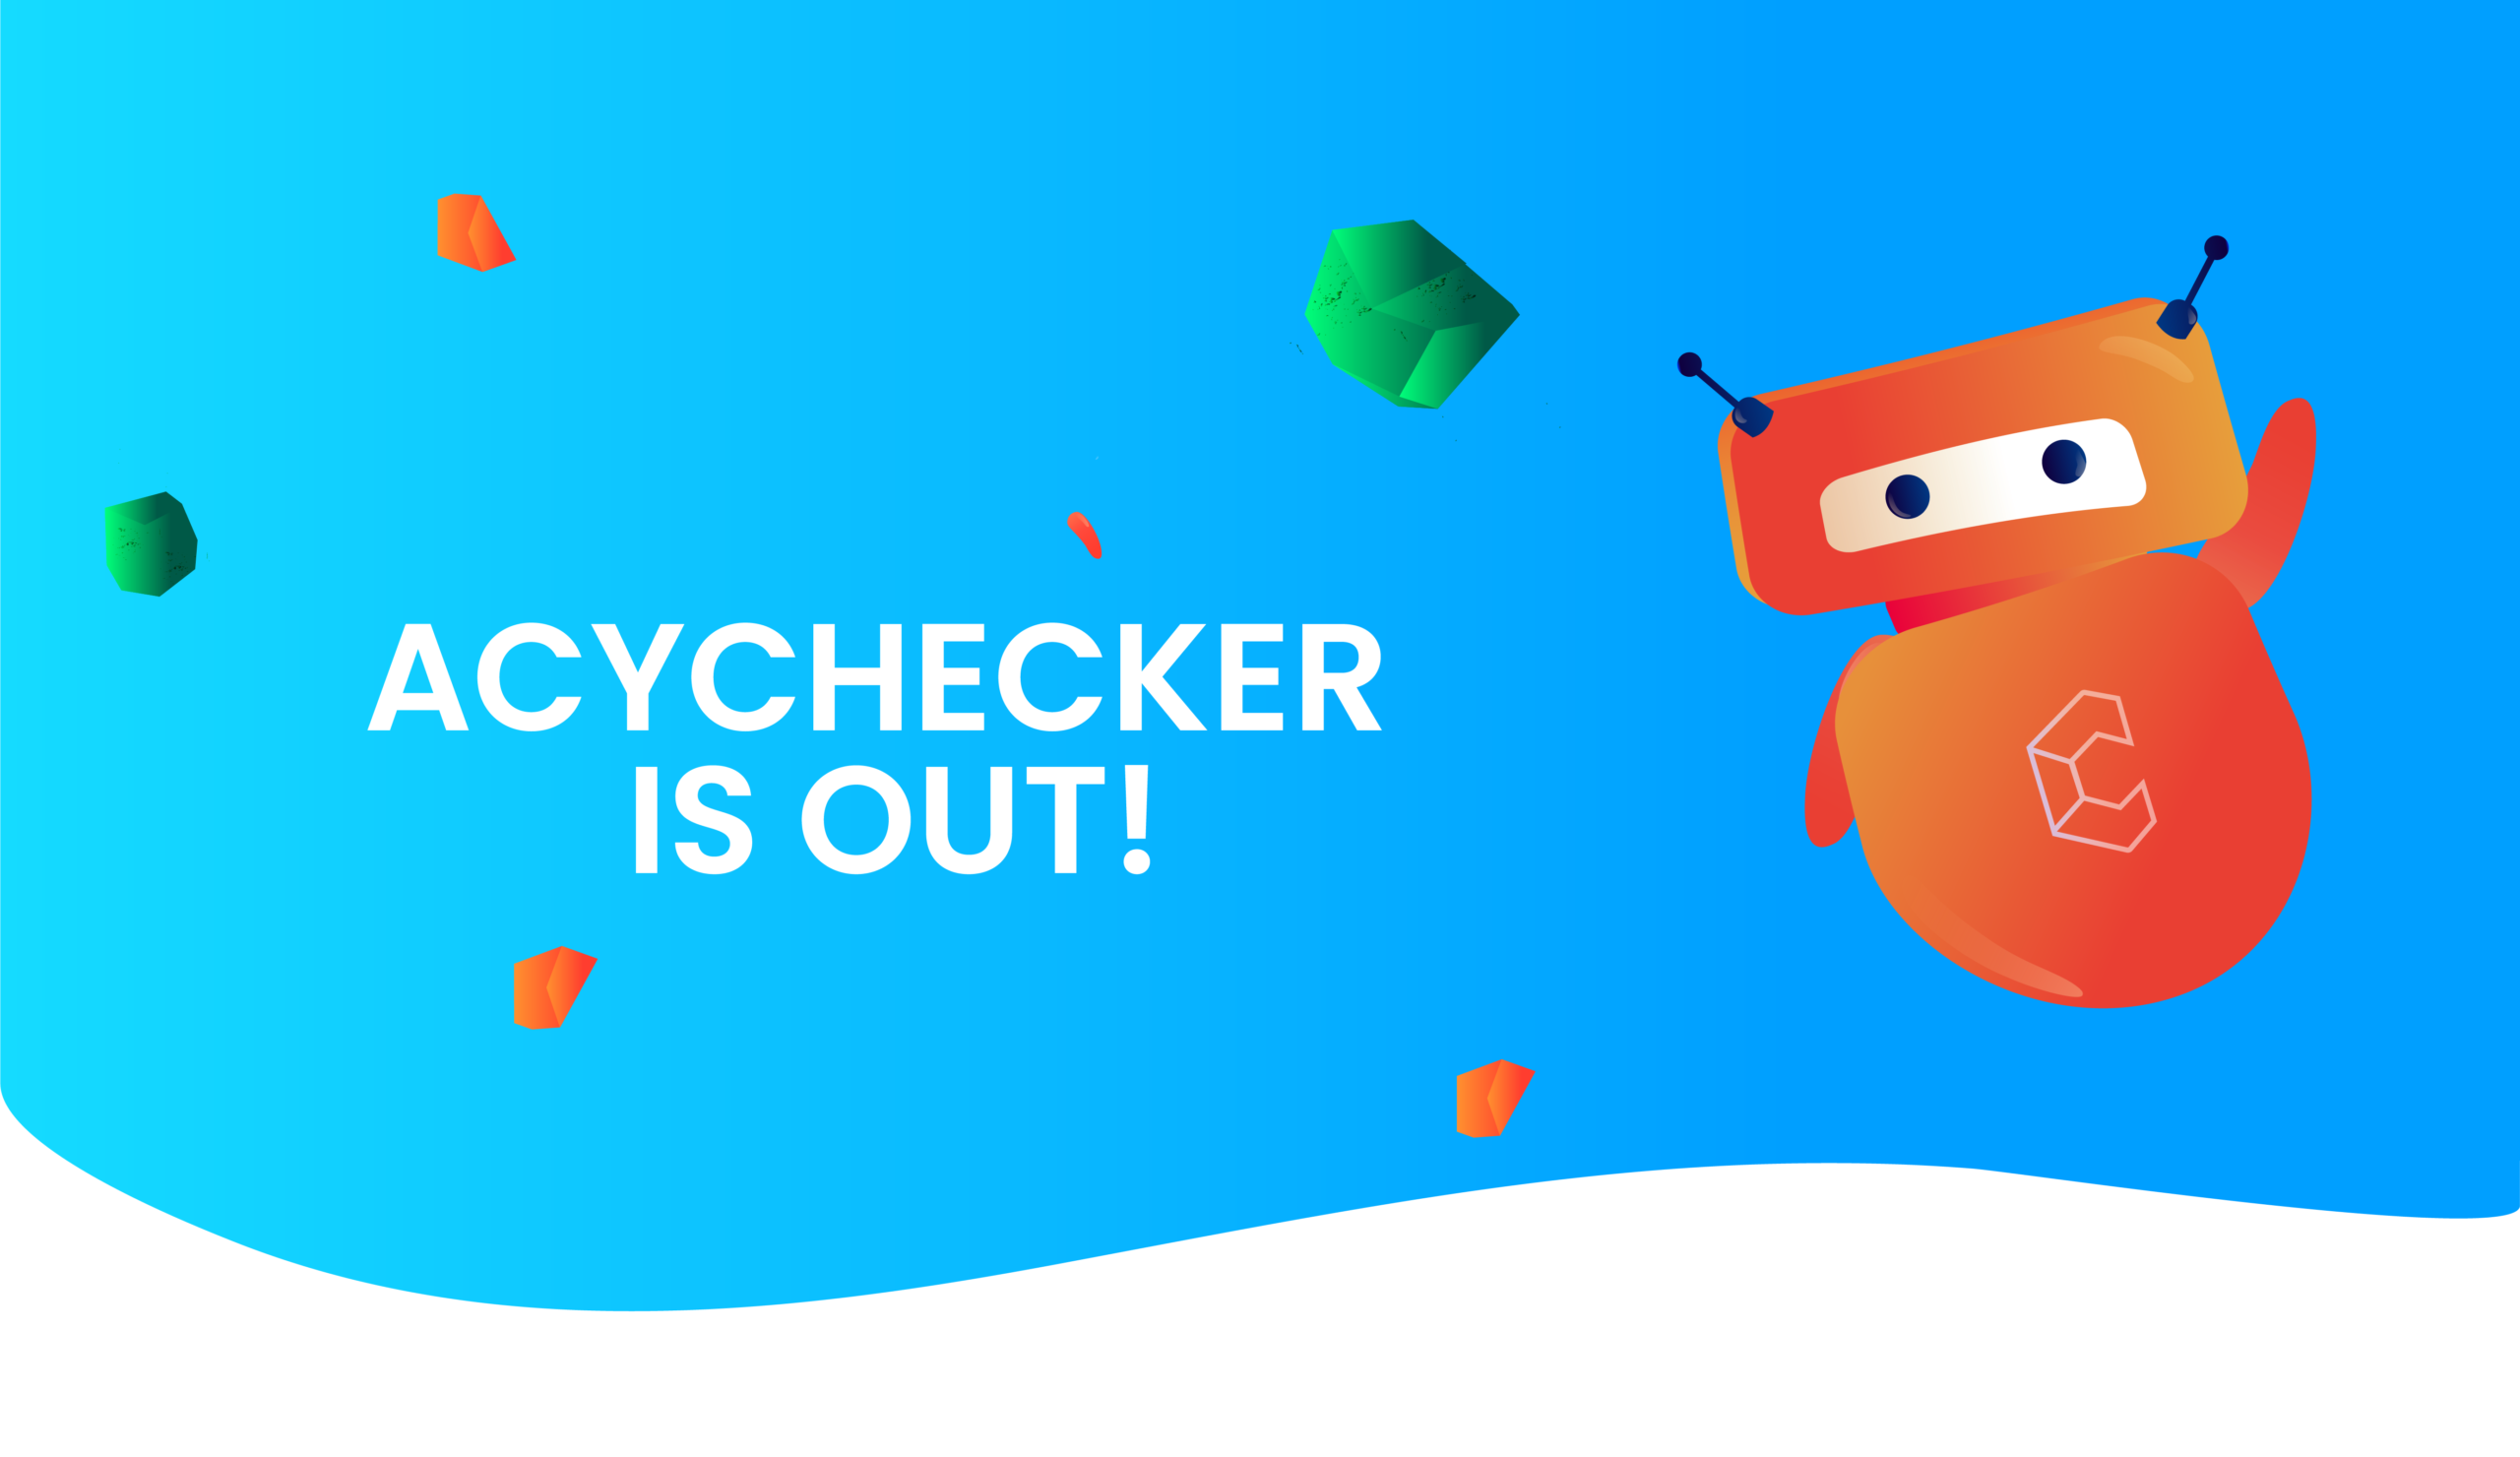 acychecker is out